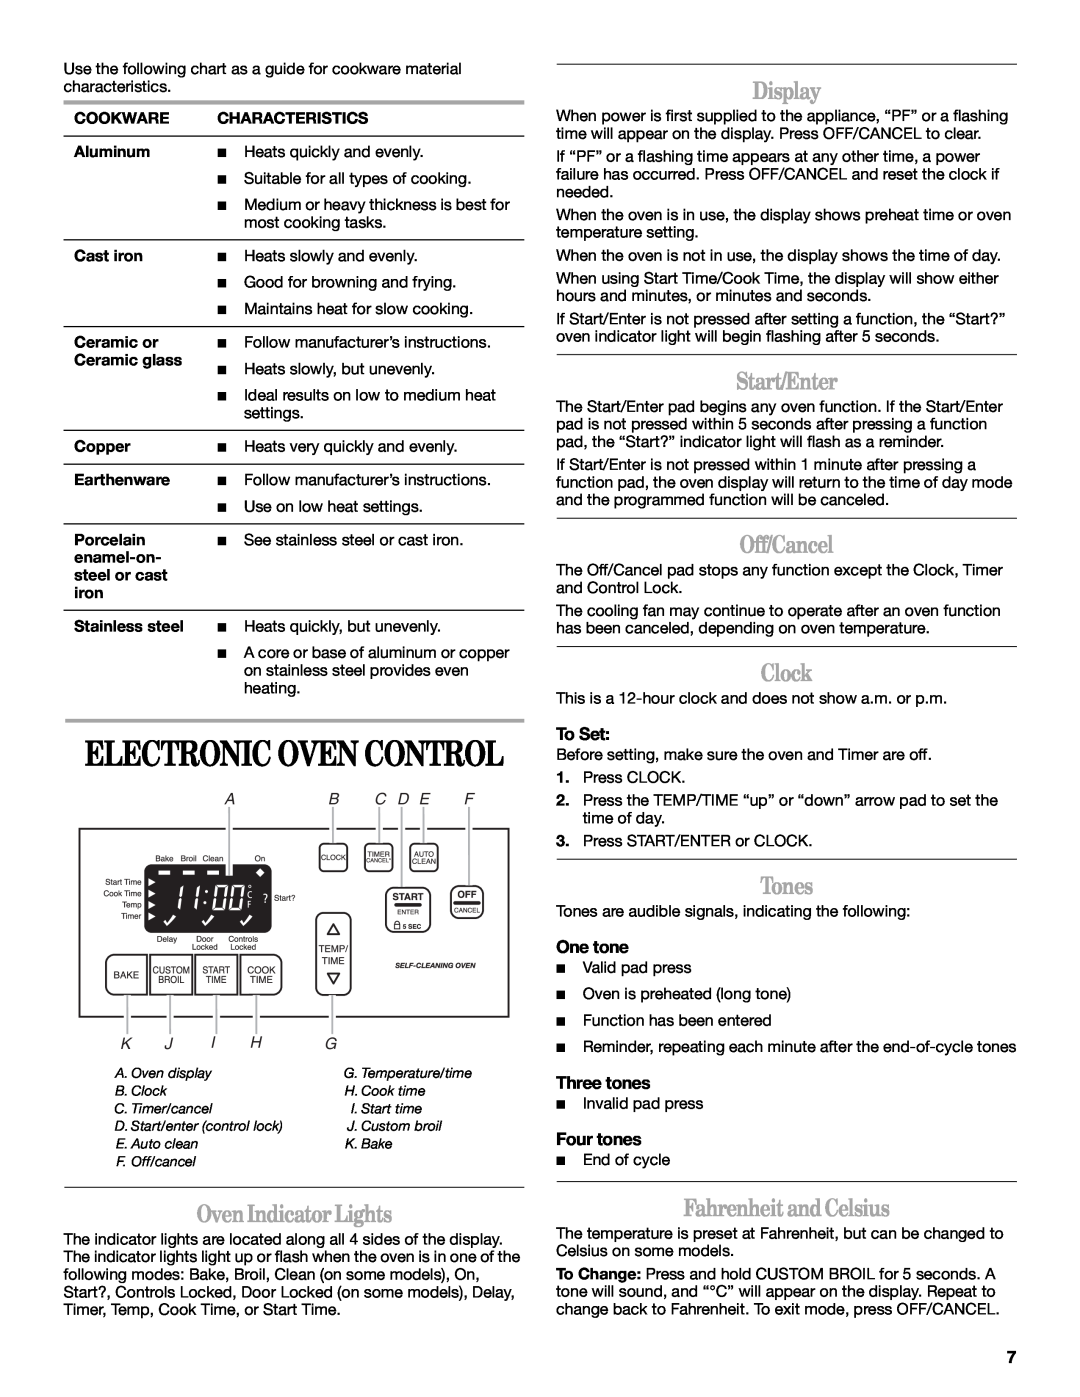 Whirlpool IGS325RQ2 Electronic Oven Control, Oven Indicator Lights, Display, Start/Enter, Off/Cancel, Clock, Tones, To Set 